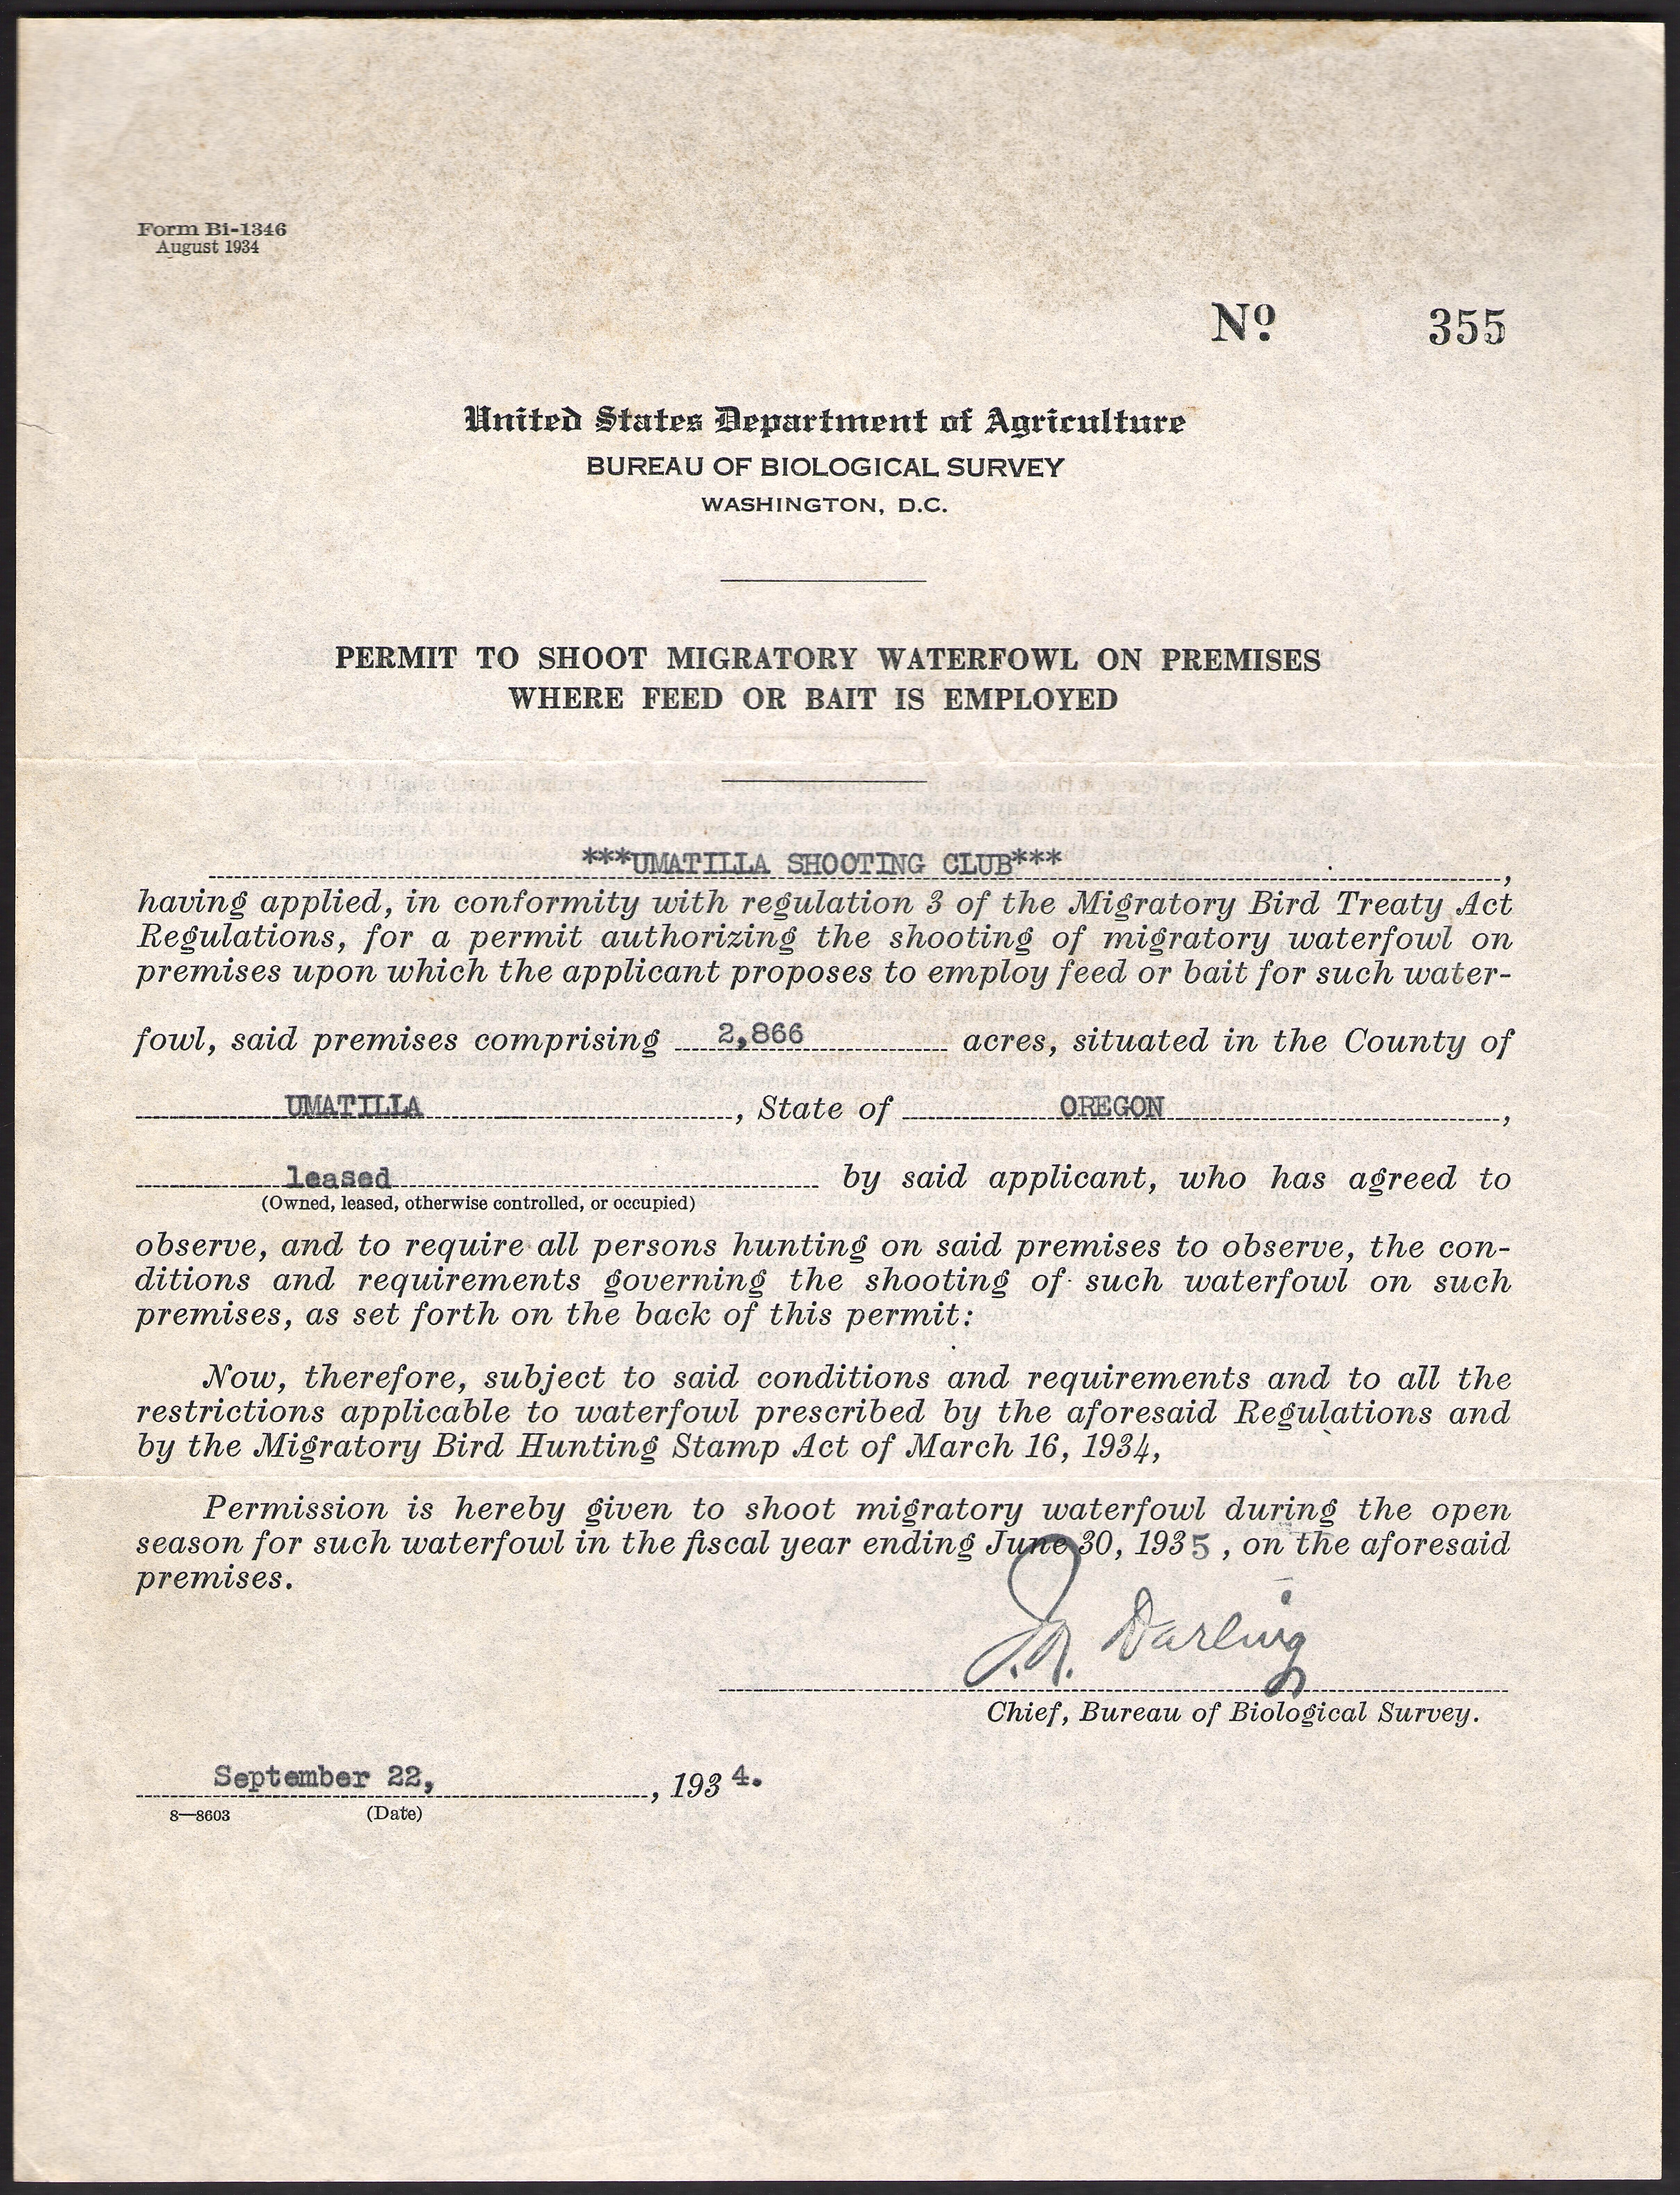 1934 Permit To Shoot Waterfowl Where Feed or Bait Is Employed - Auto Signed J.N. Darling